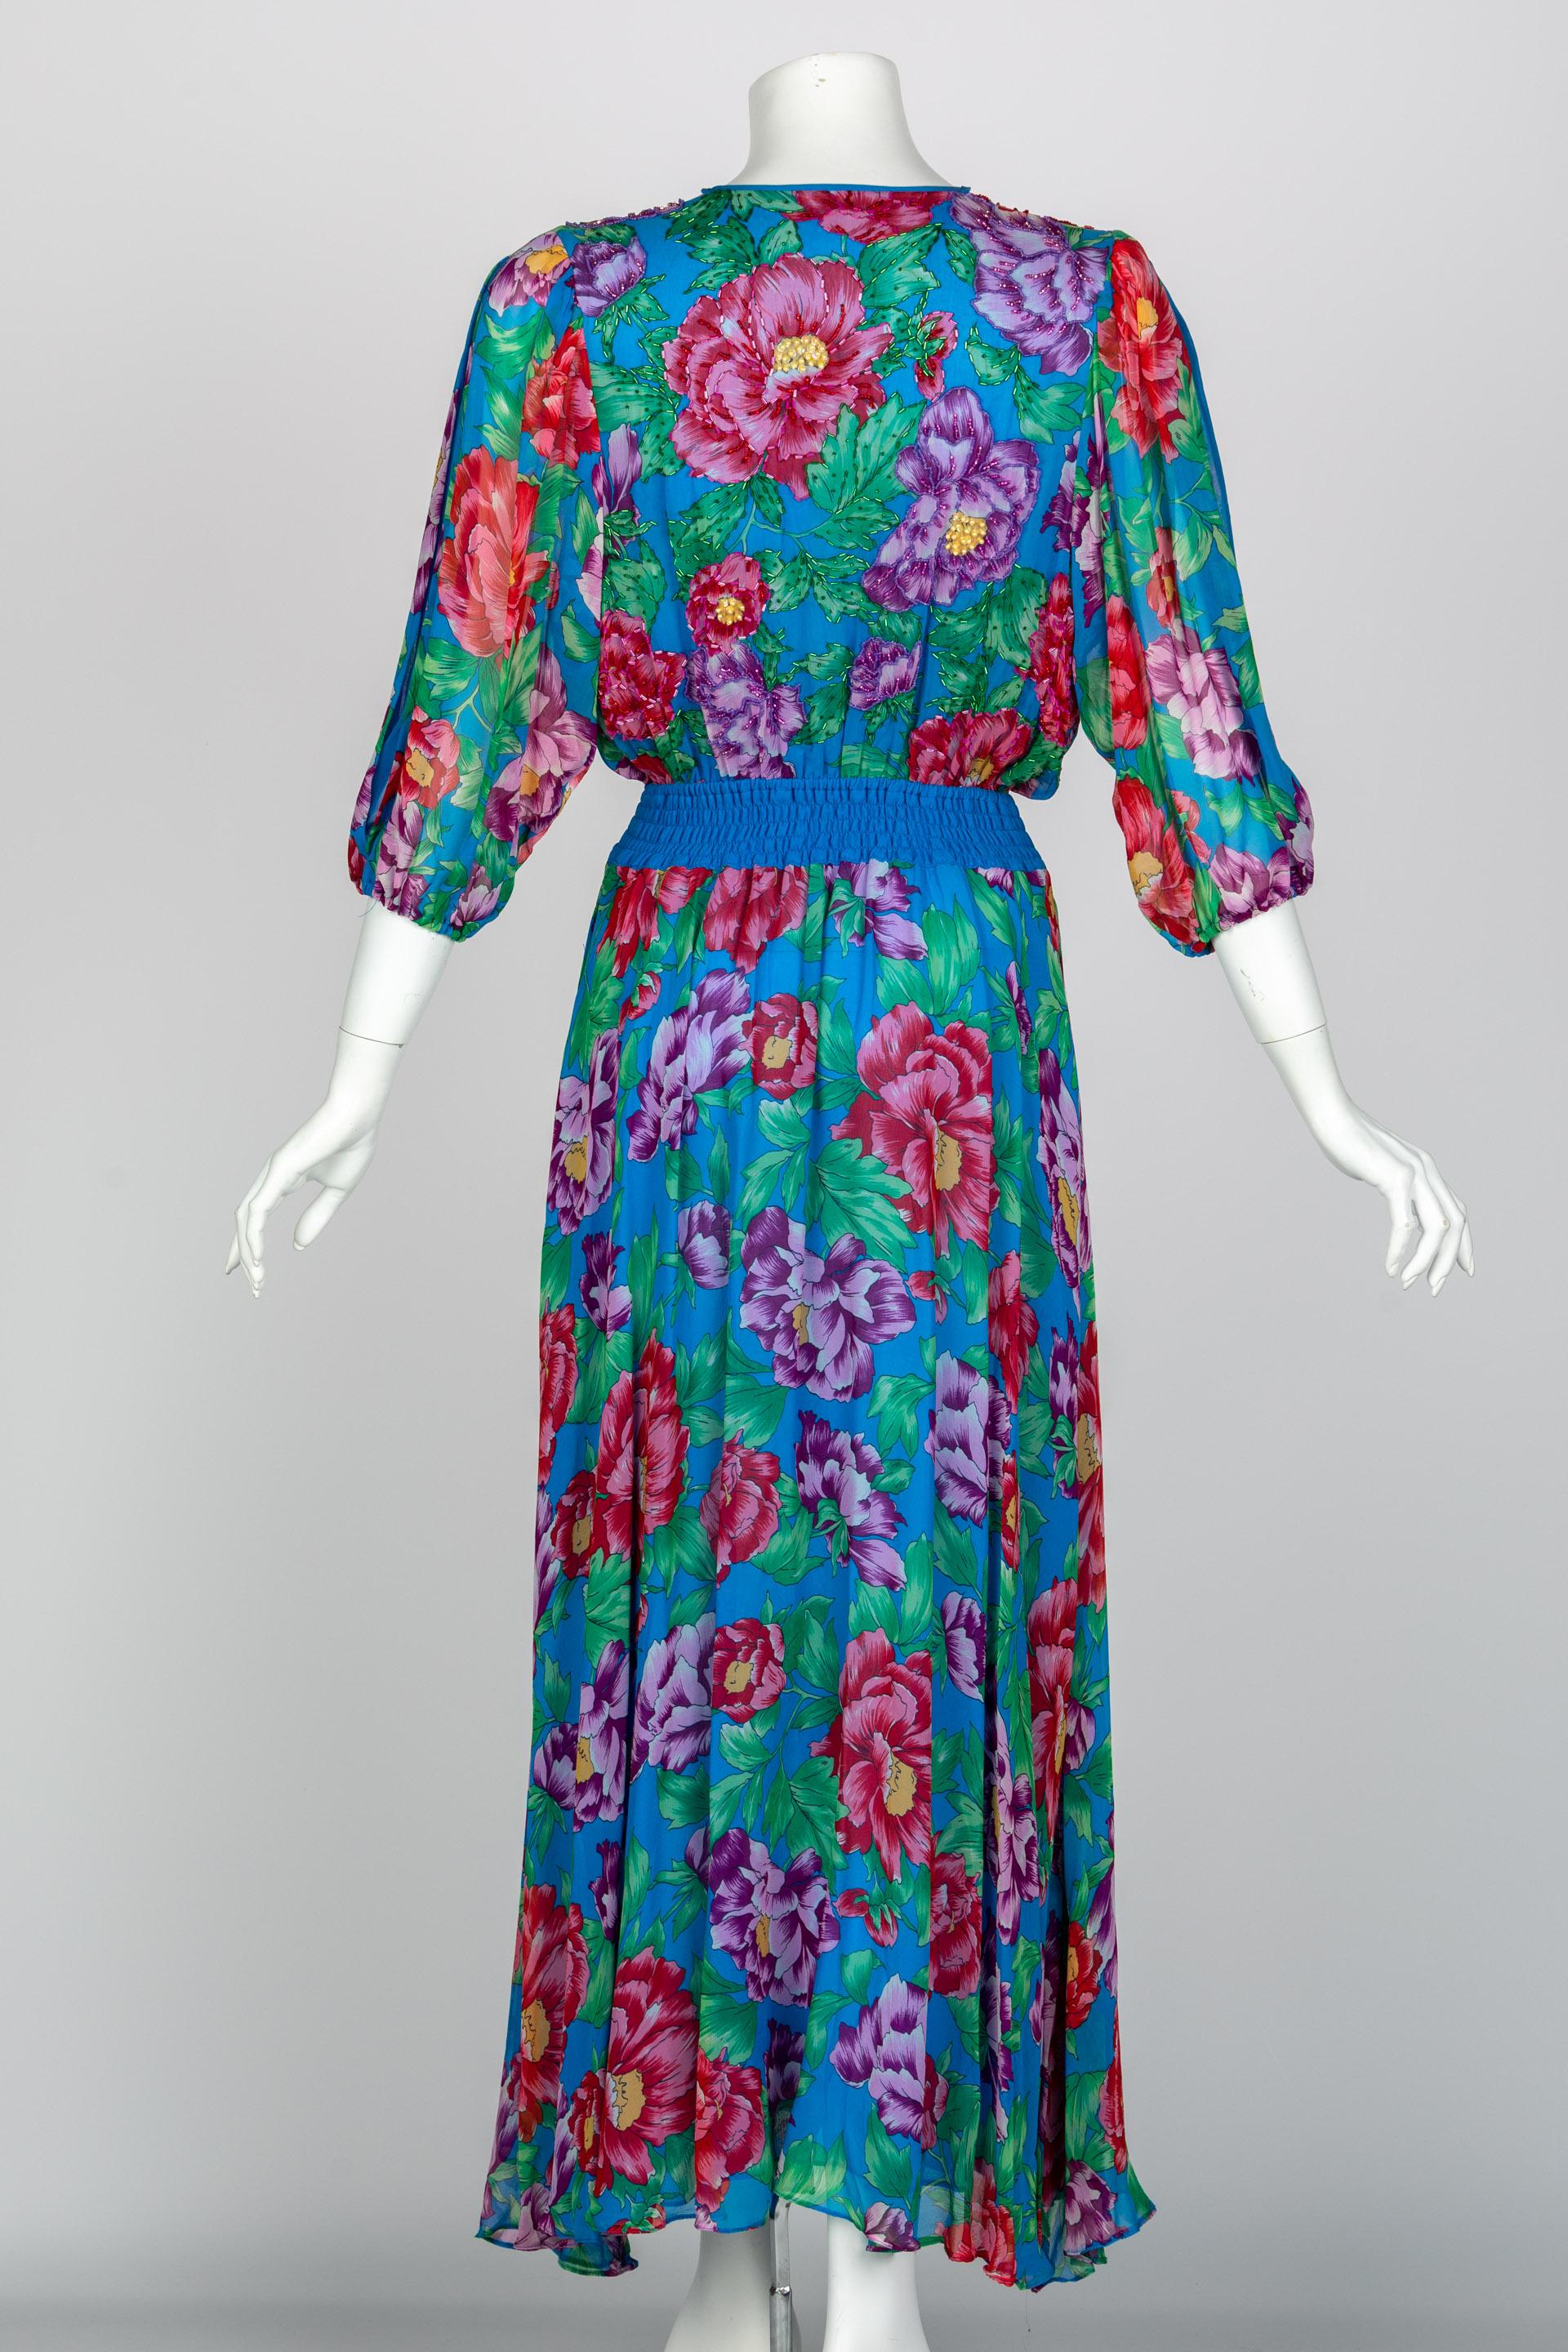 Diane Freis Blue Floral Silk Georgette Dress, 1990s In Excellent Condition For Sale In Boca Raton, FL